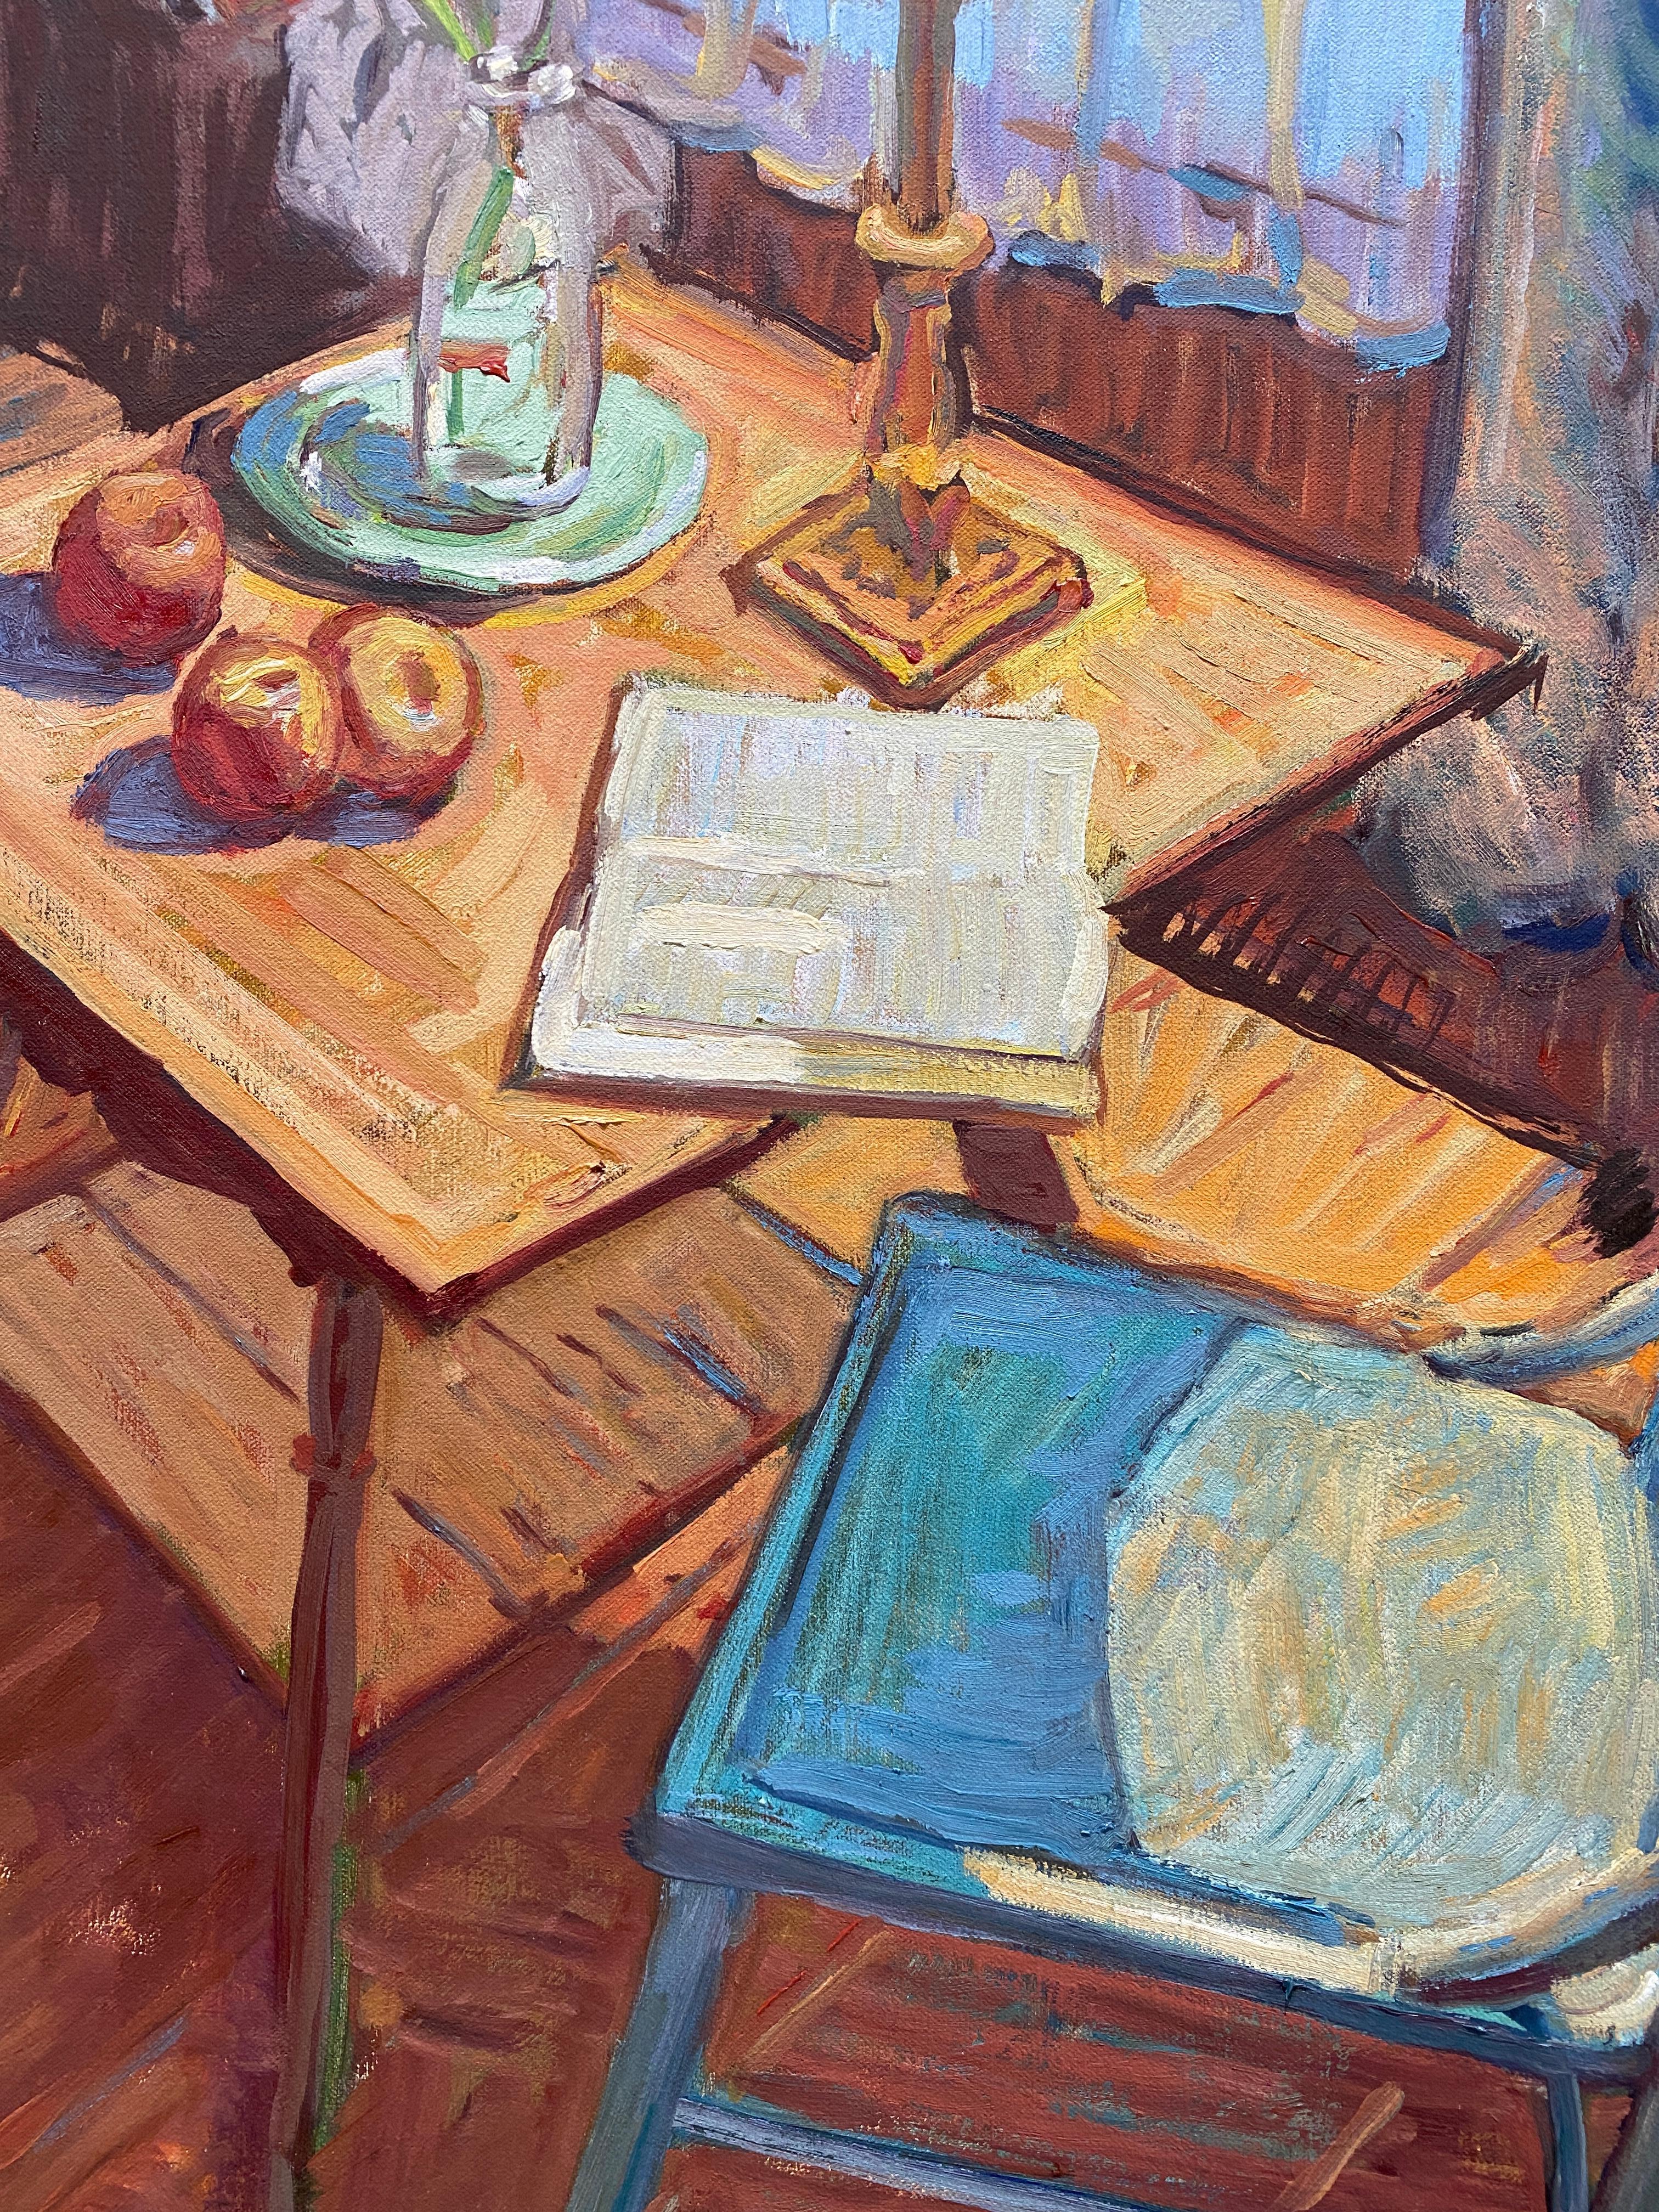 An oil painting of an interior soaked in hues of blue. A traditional wooden chair is pulled out from a small wooden table, where an open book, a vase of Persian Buttercups, a group of apples, and a stylish bell lamp are situated. The background is